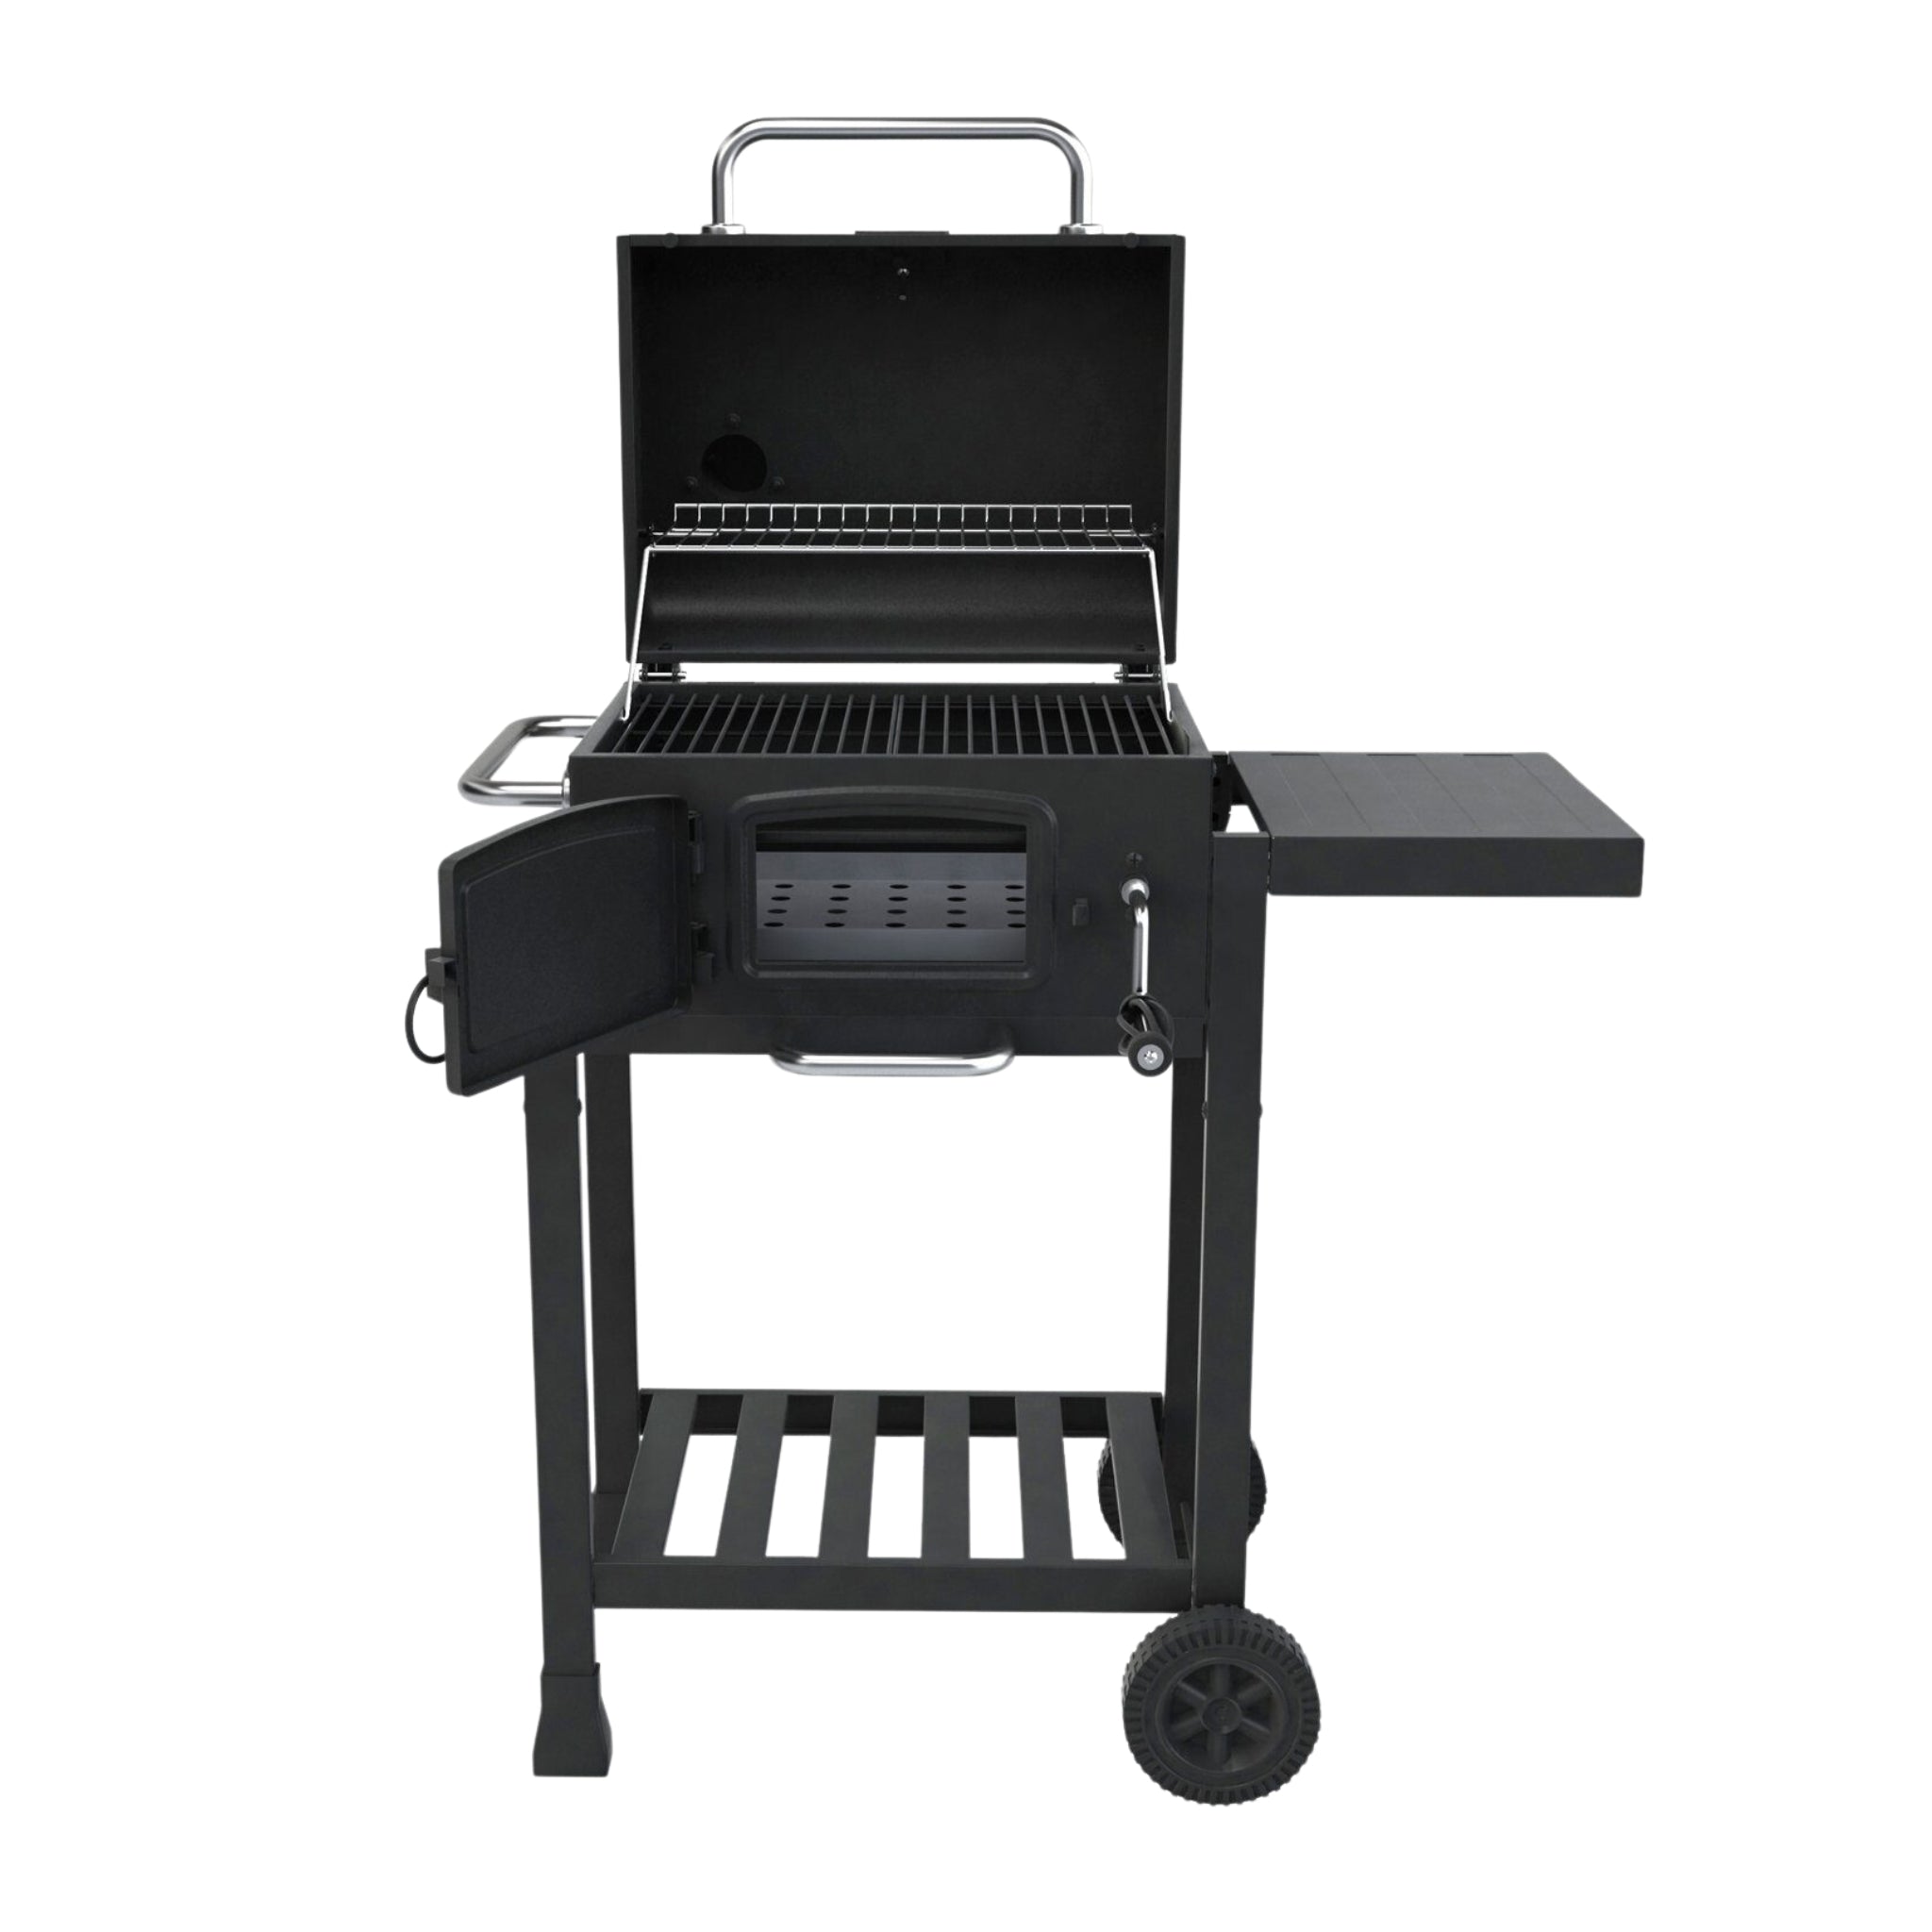 Jr. Smoker Charcoal Barbecue + Cover